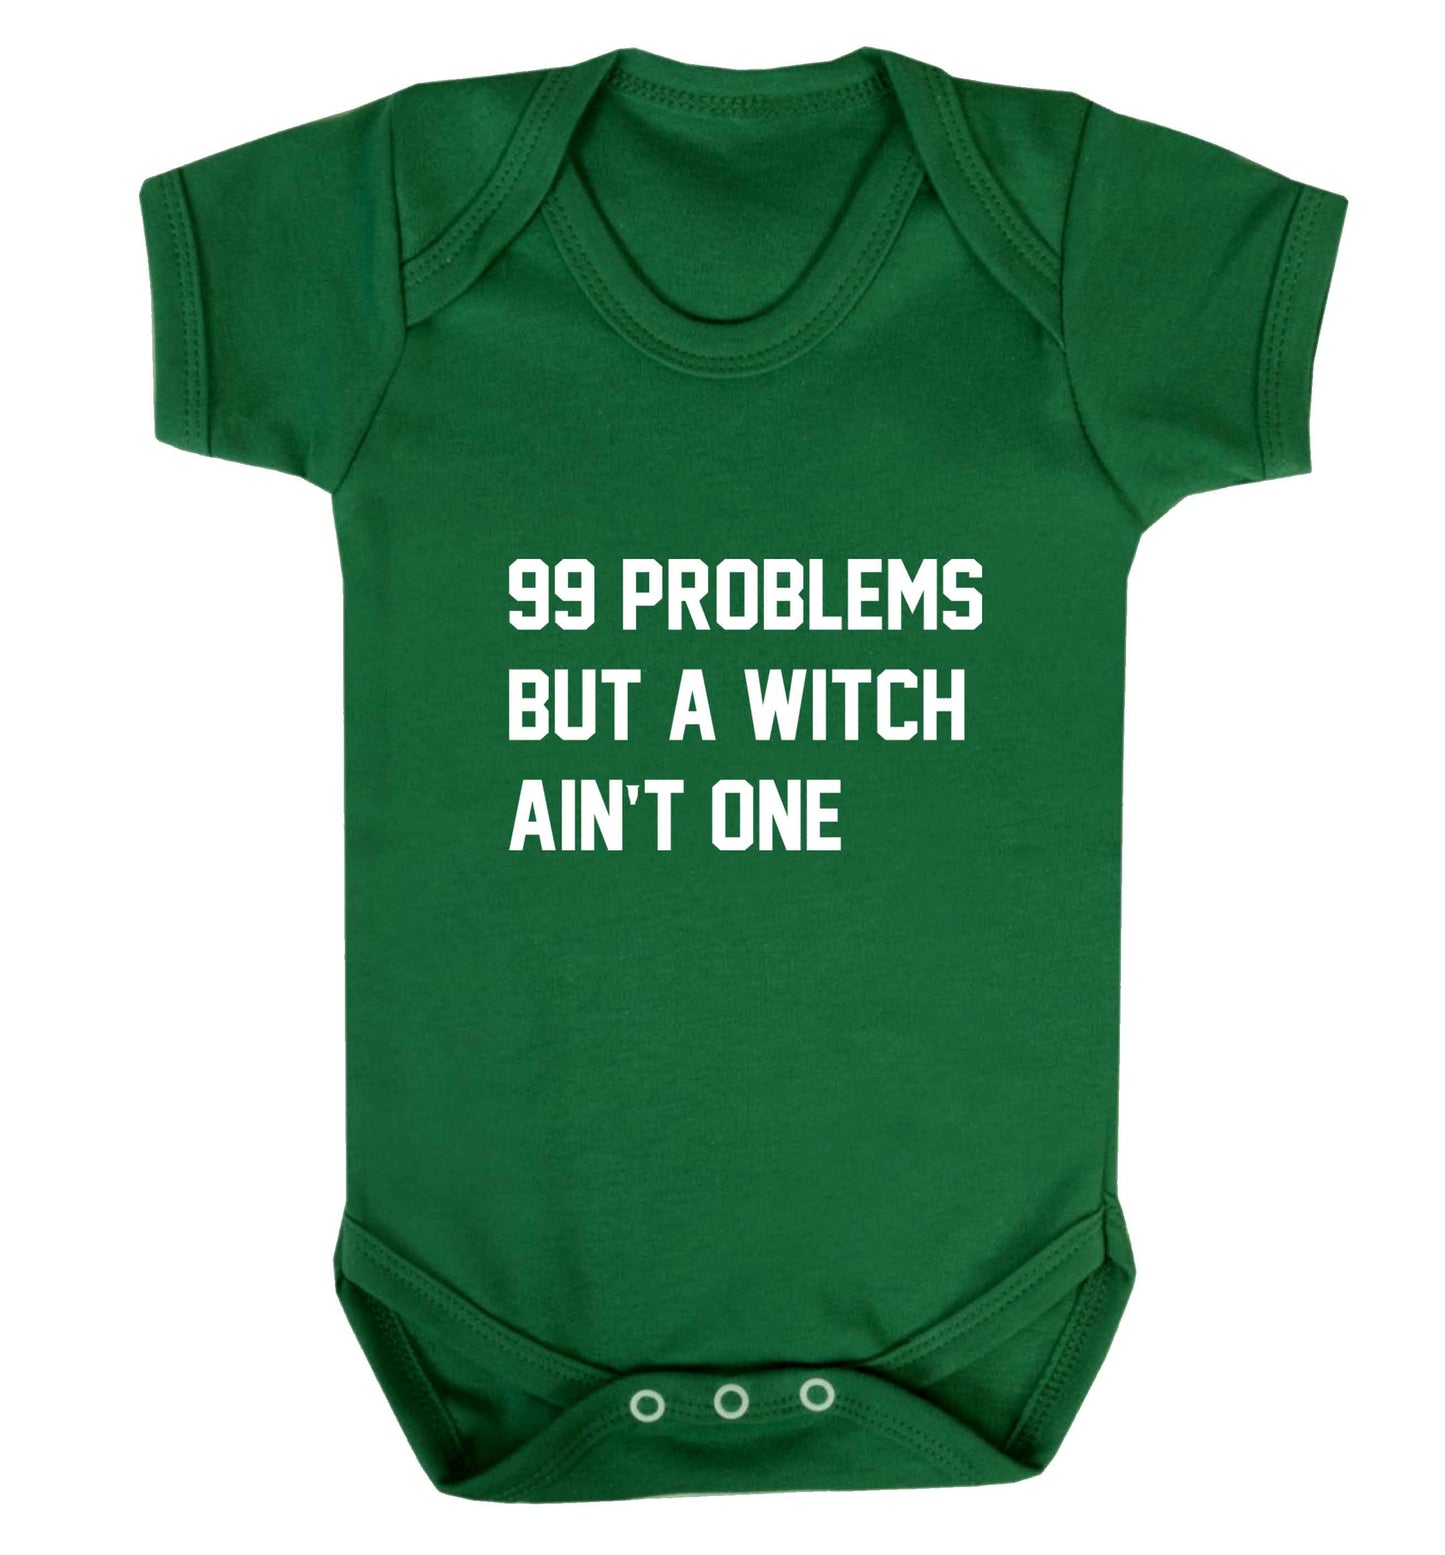 99 Problems but a witch aint one baby vest green 18-24 months